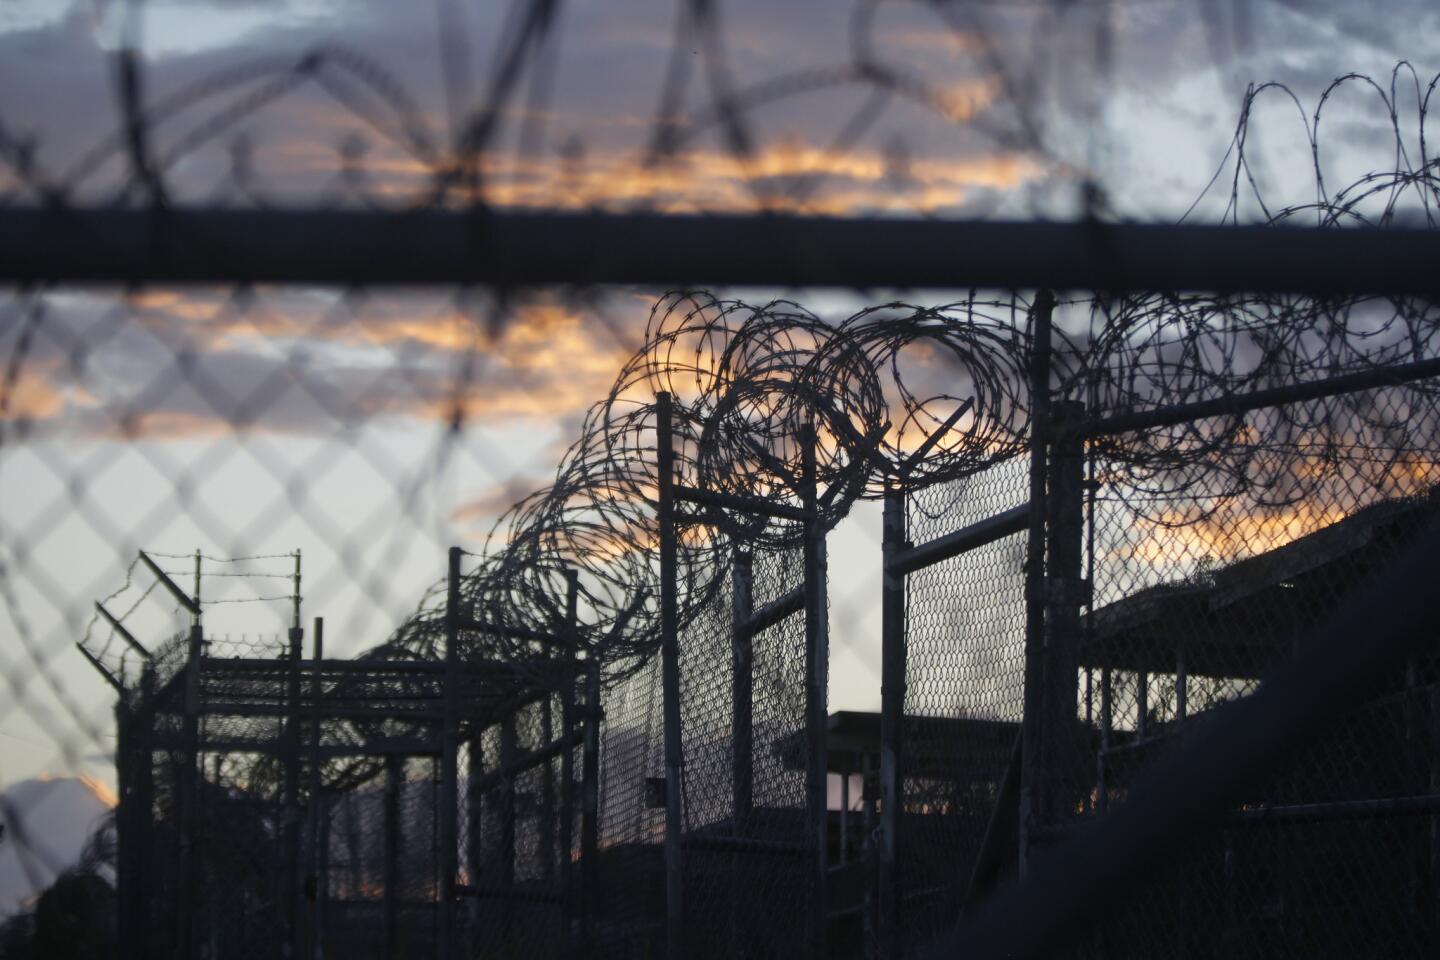 The now closed Camp X-Ray at Guantanamo Bay Naval Base, Cuba, is shown in November 2013. X-Ray was the first detention facility for Al Qaeda and Taliban militants captured after the Sept. 11, 2001, attacks.